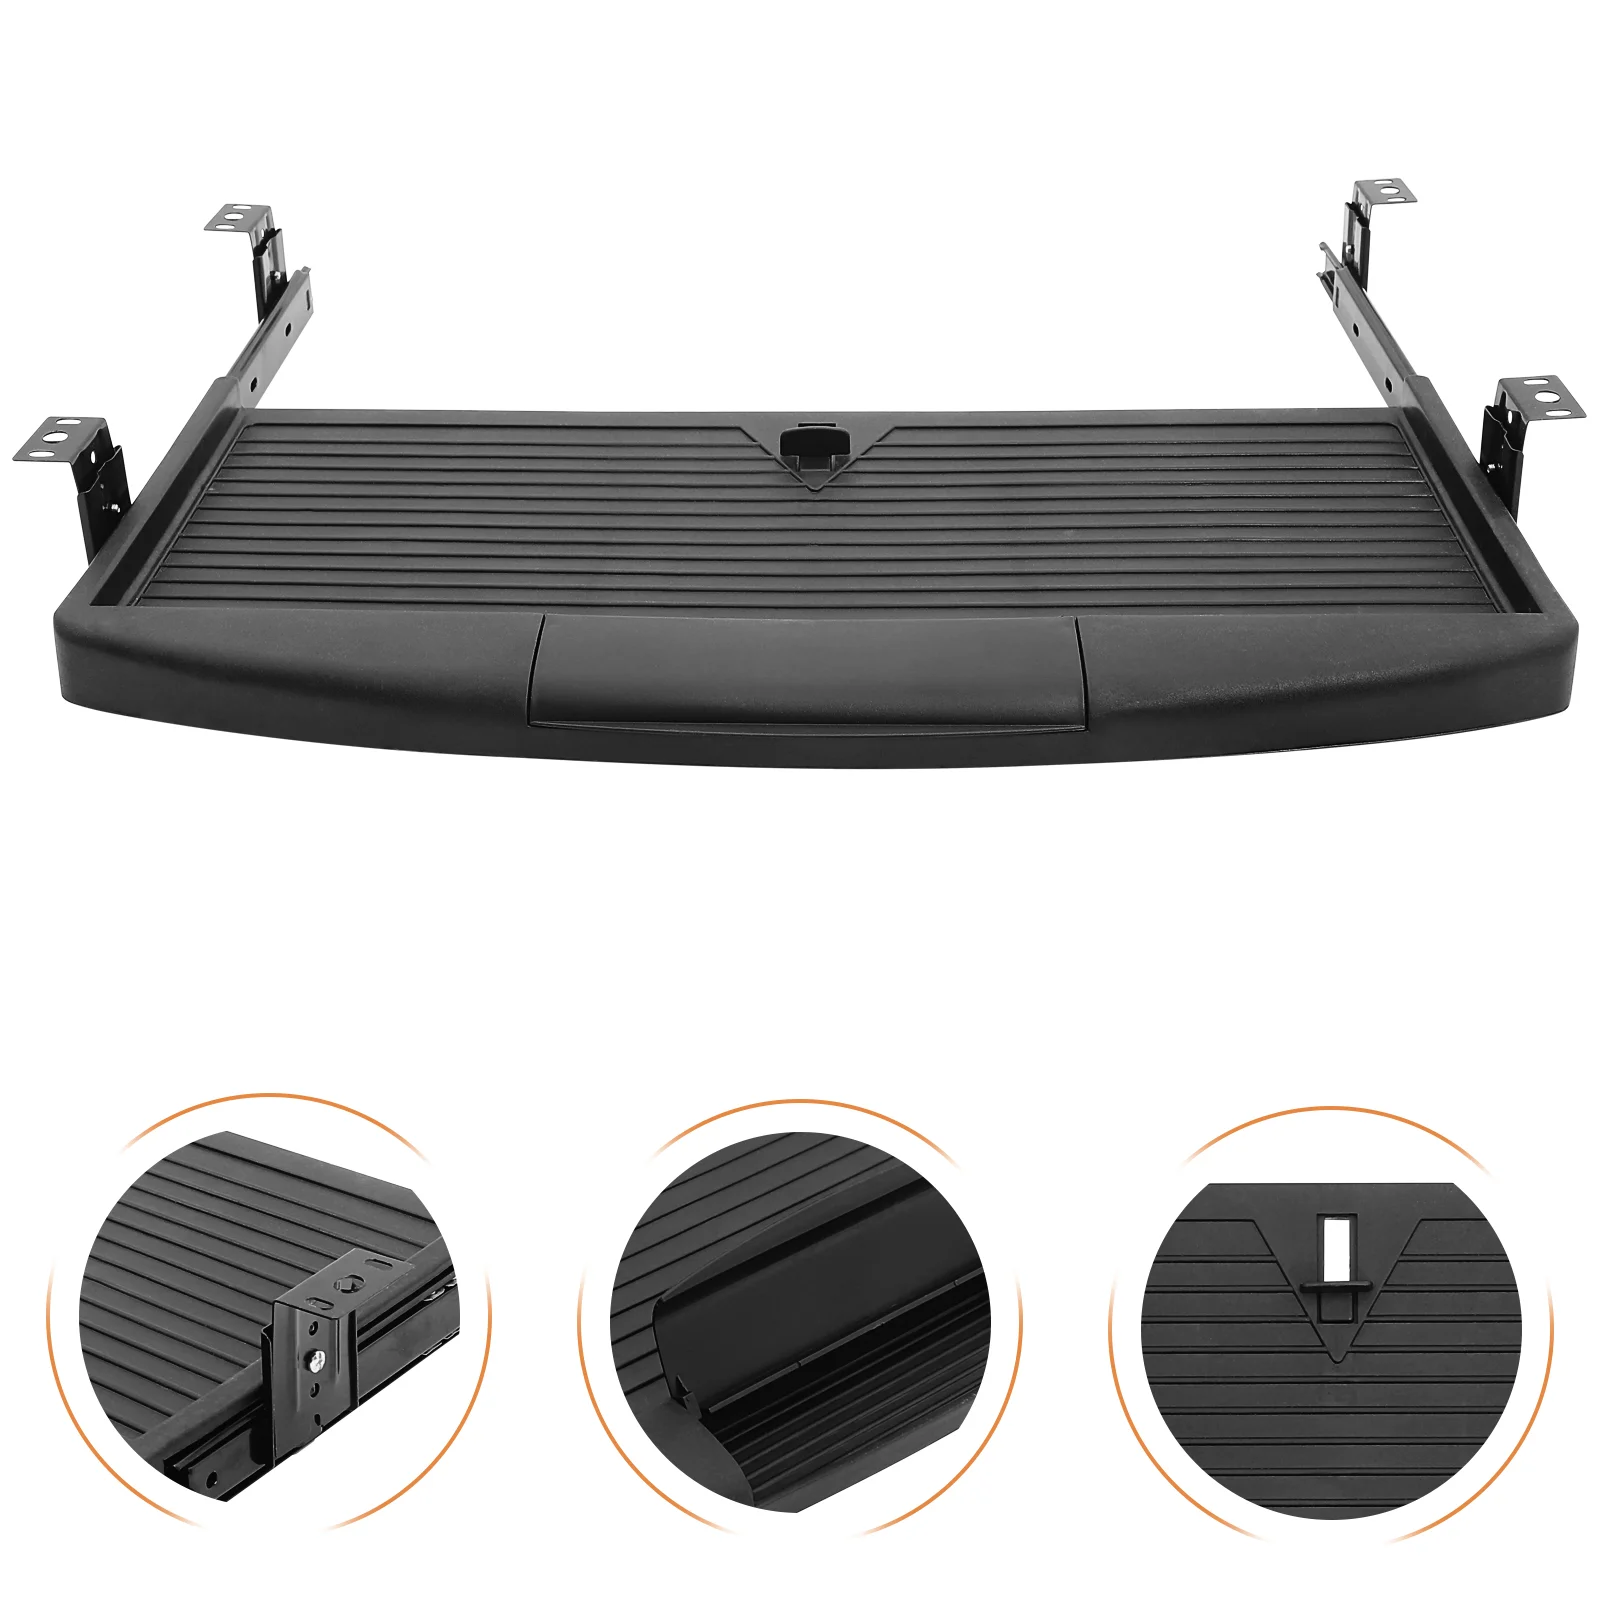 Under Desk Keyboard Tray Ergonomic Slide Out Platform for Computer Mouse and Keyboard Black mechanical feel wireless keyboard and mouse set game keyboard and mouse computer two piece